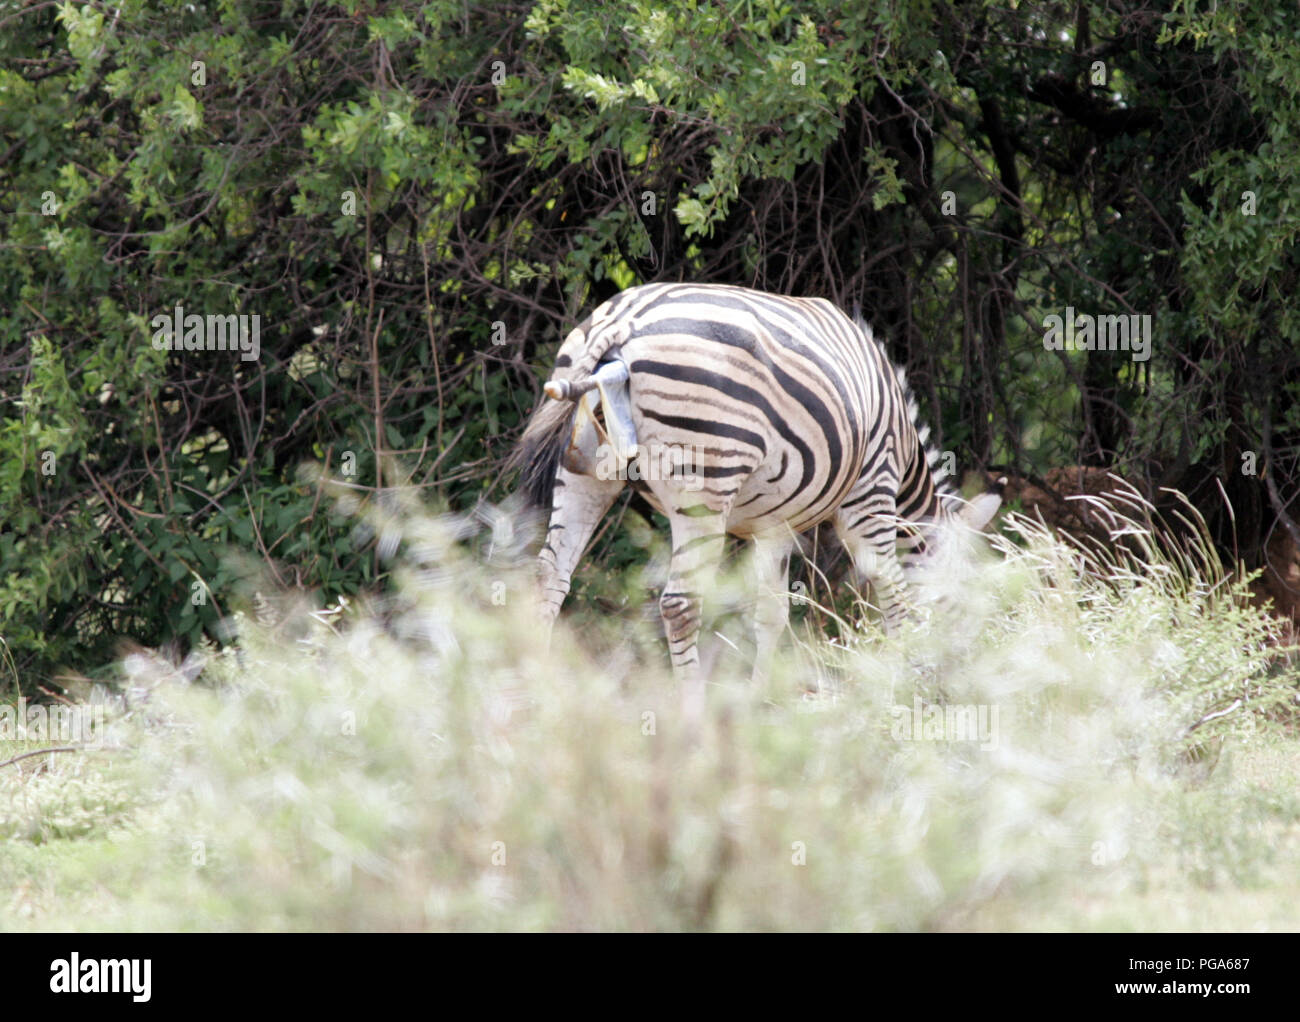 Zebra giving birth and defending new baby. Stock Photo